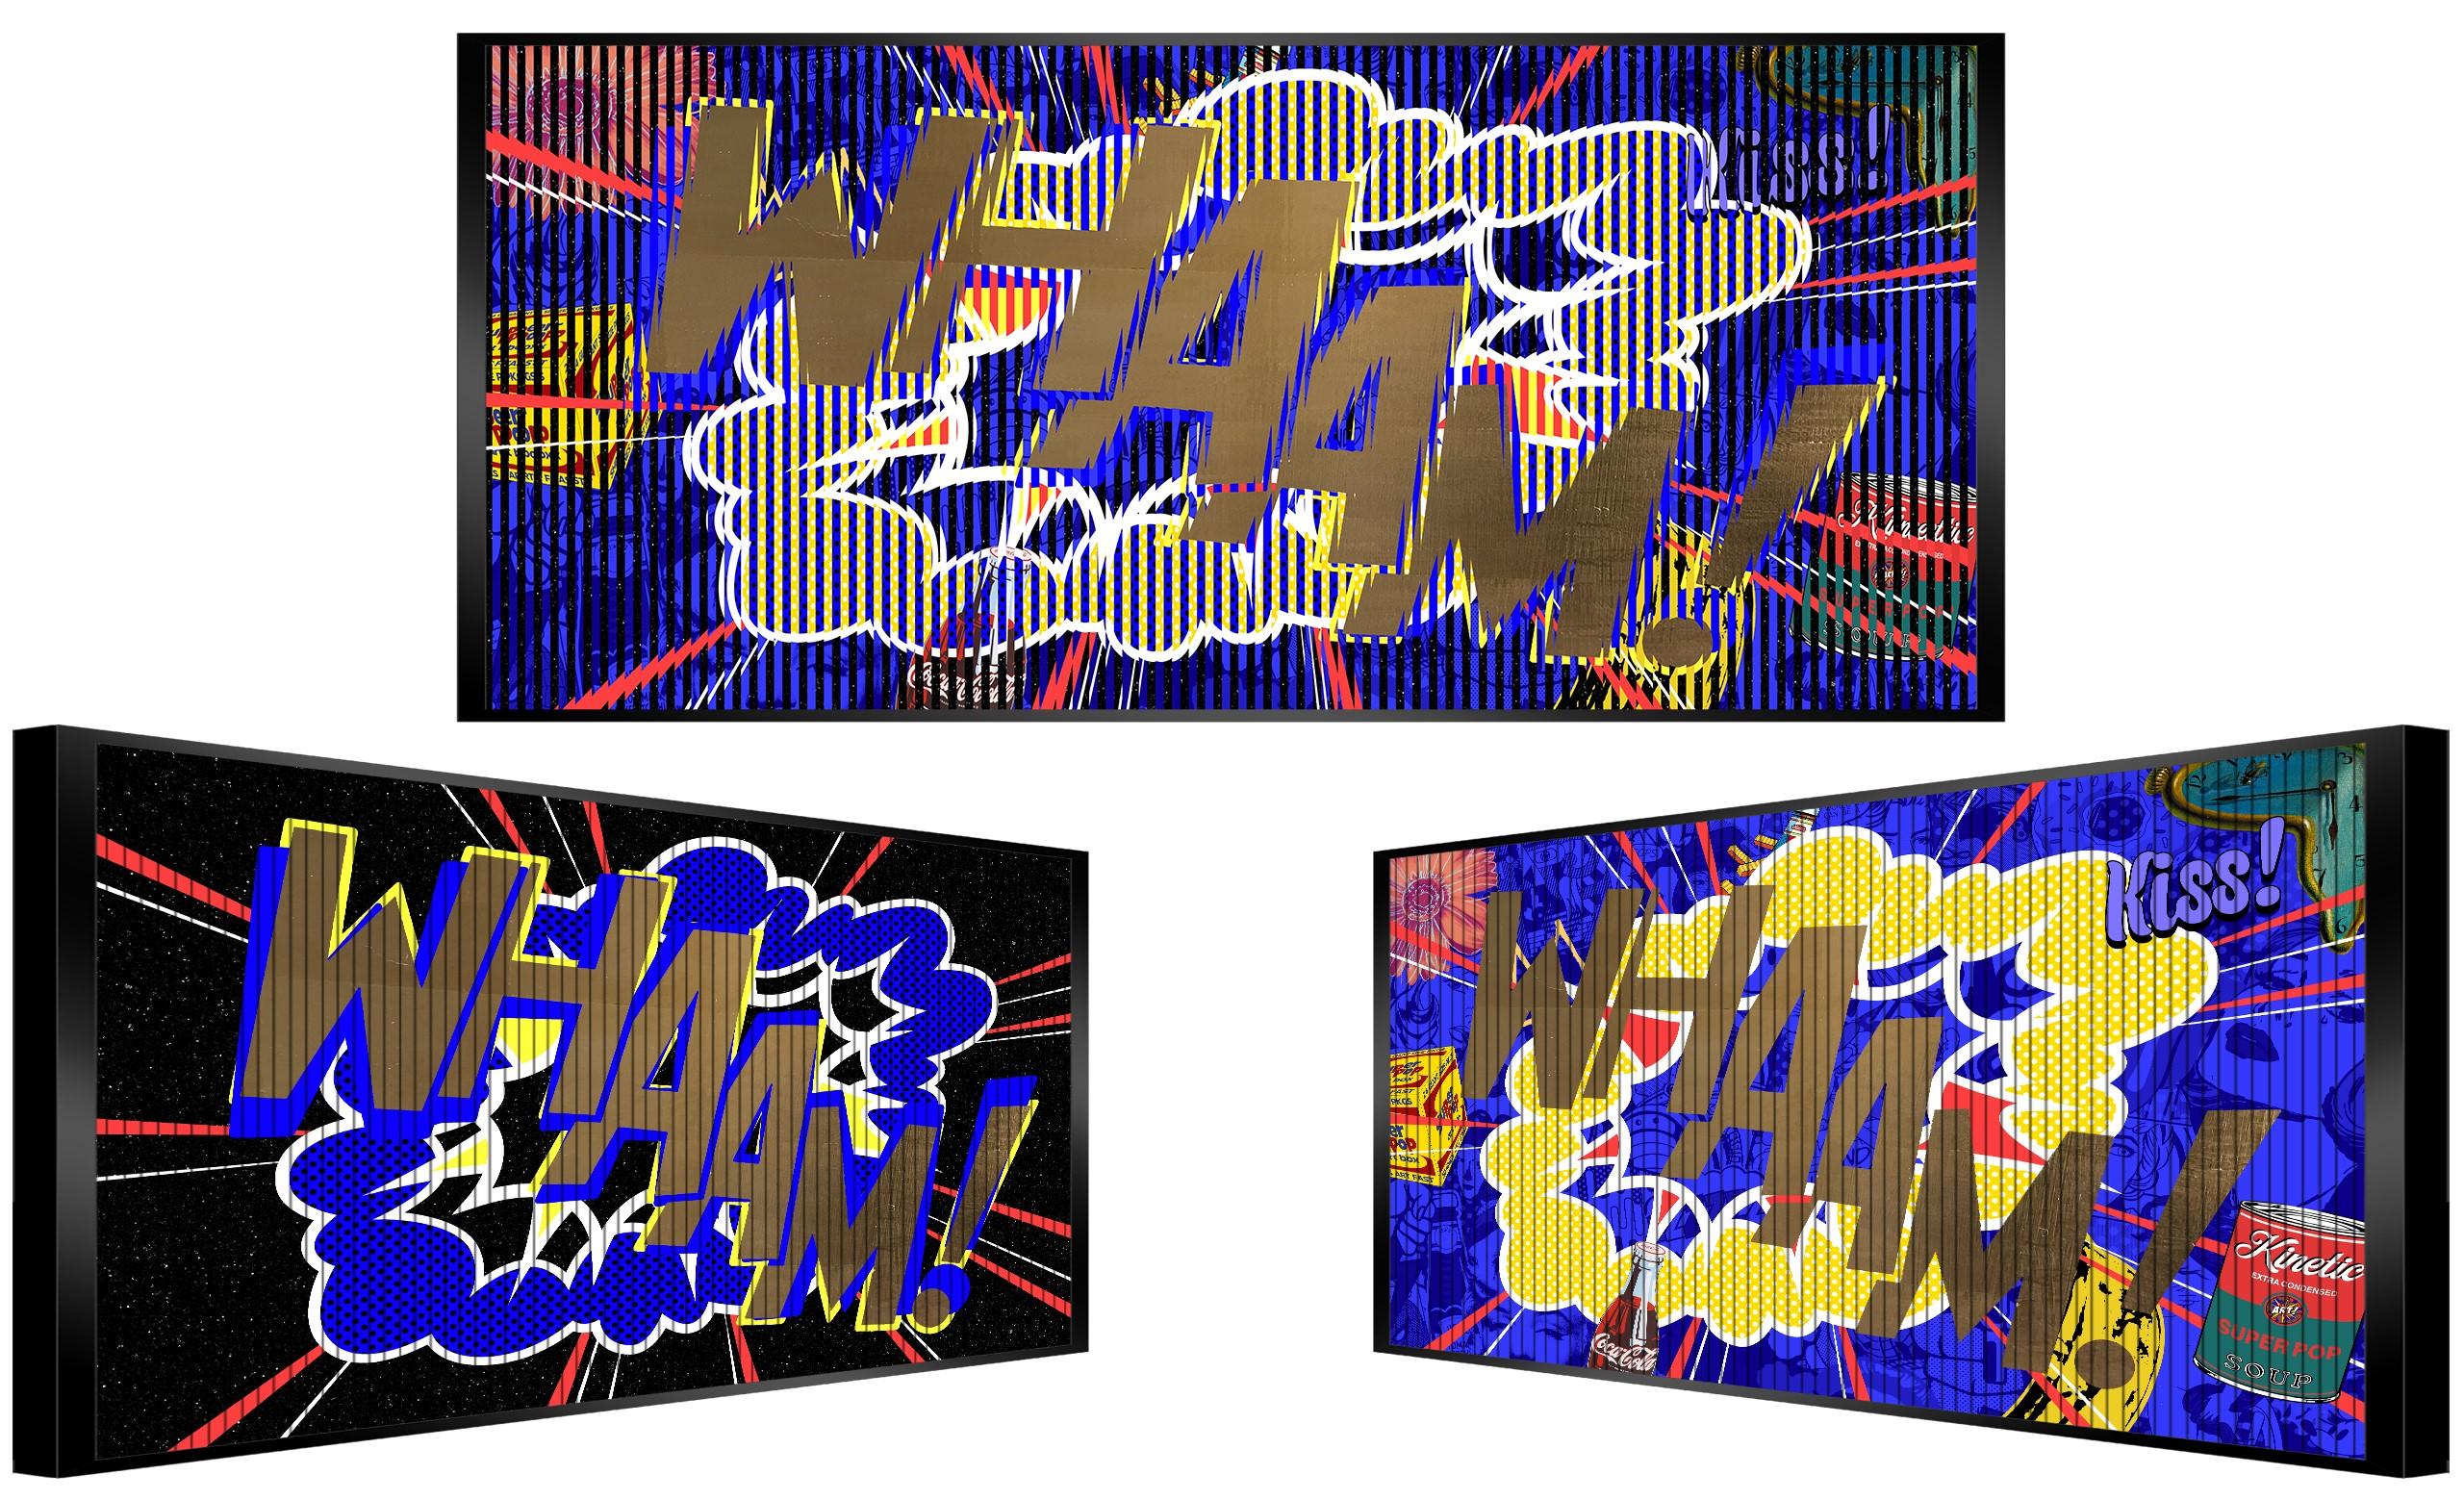 Oh Whaam, mixed media with gold leaf, 2022, pop art, 34 inches, by Rubinstein - Mixed Media Art by Patrick Rubinstein